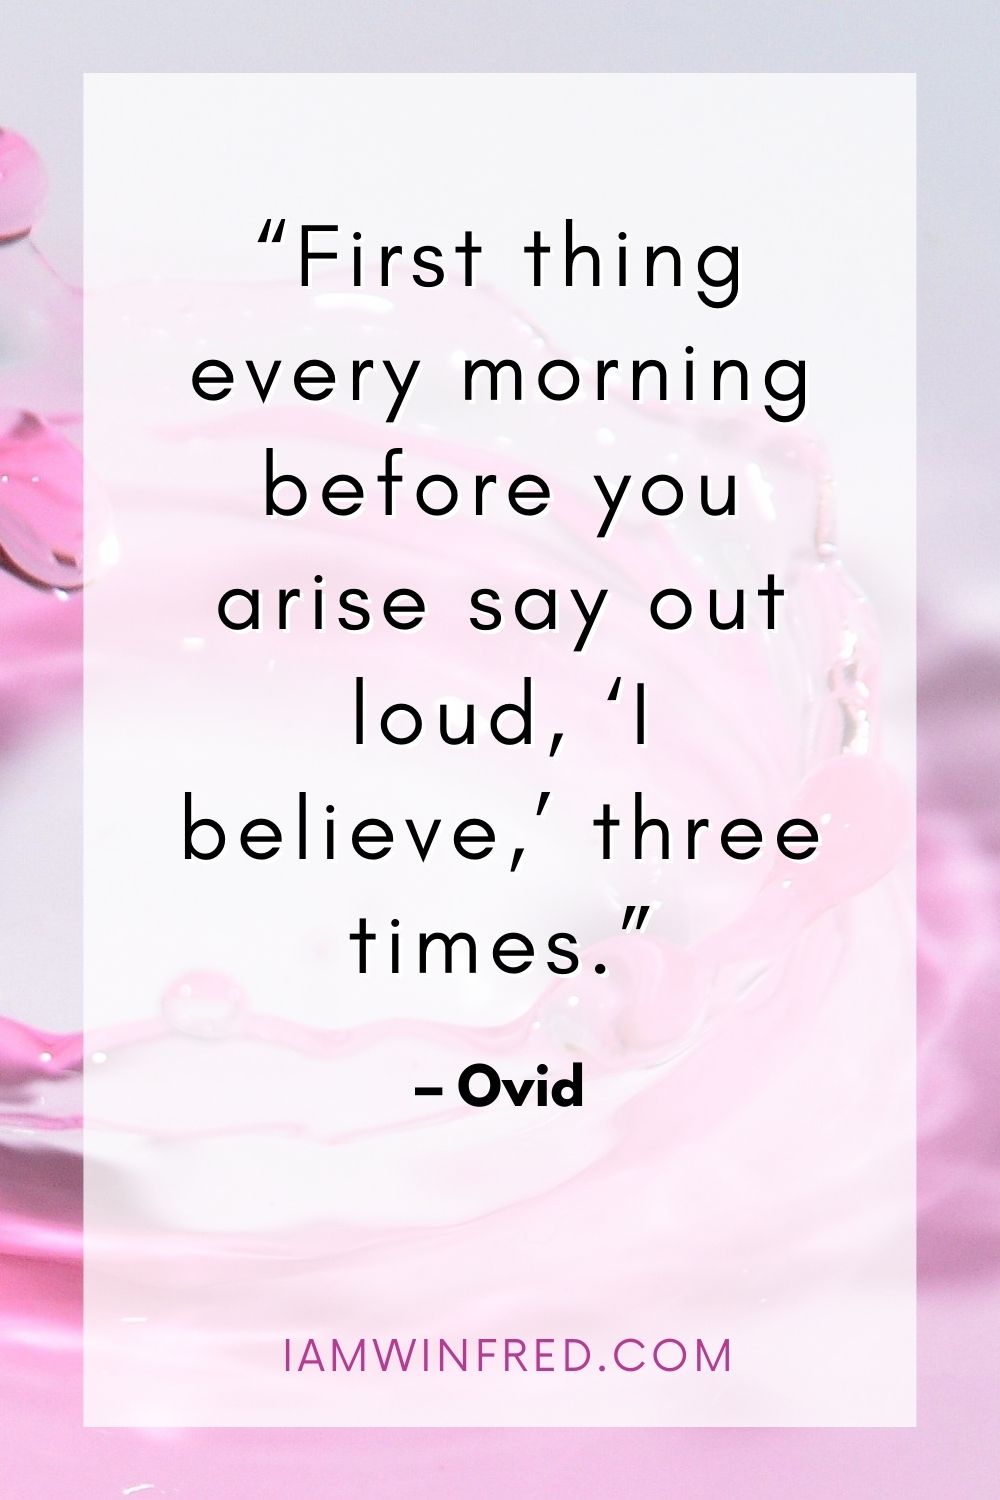 First Thing Every Morning Before You Arise Say Out Loud ‘I Believe Three Times.